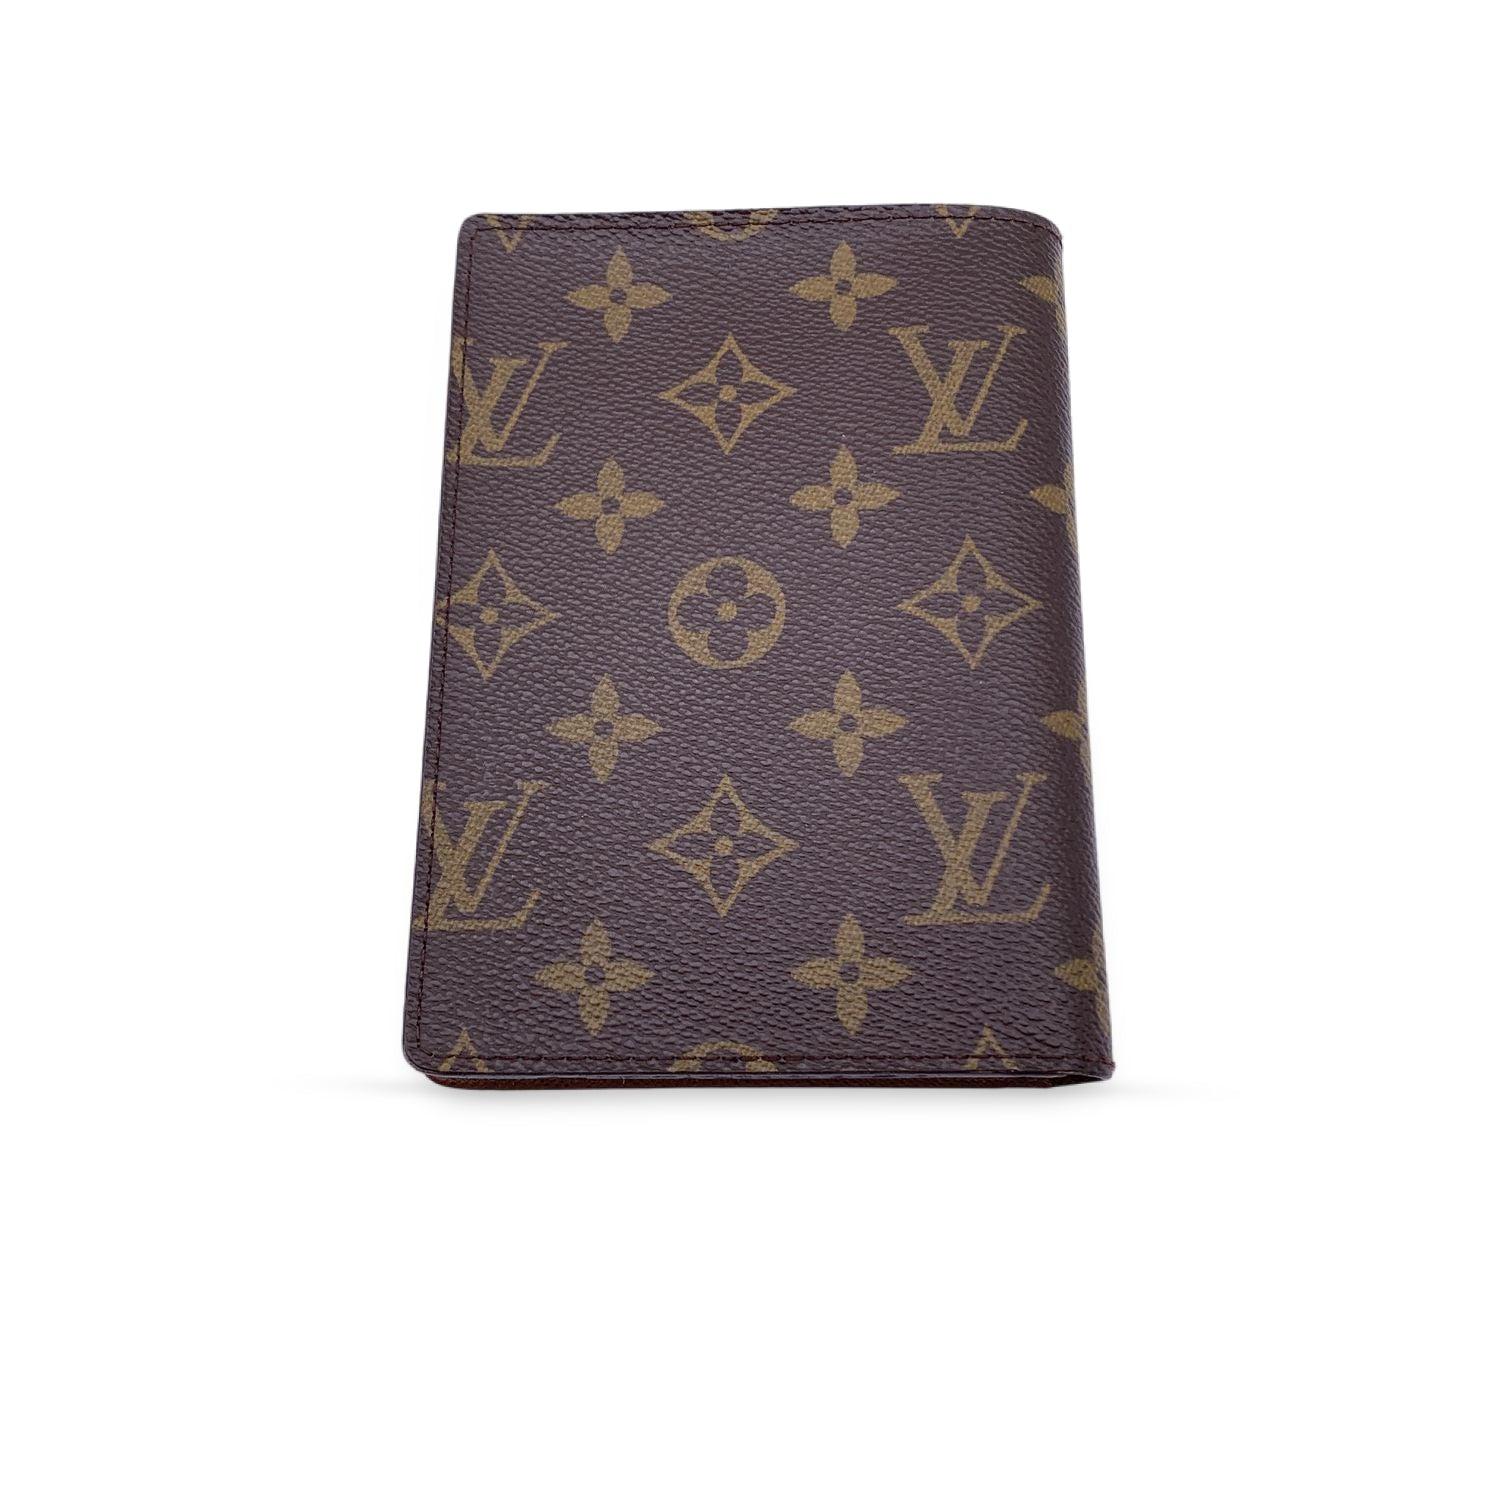 Louis Vuitton brown monogram canvas Portfoil 3 Vue wallet/document holder. Inside it has 6 credit card slots and 2 slots inside with plastic windows. 1 bill compartment. 'LOUIS VUITTON Paris - Made in France' embossed inside. Authenticity serial